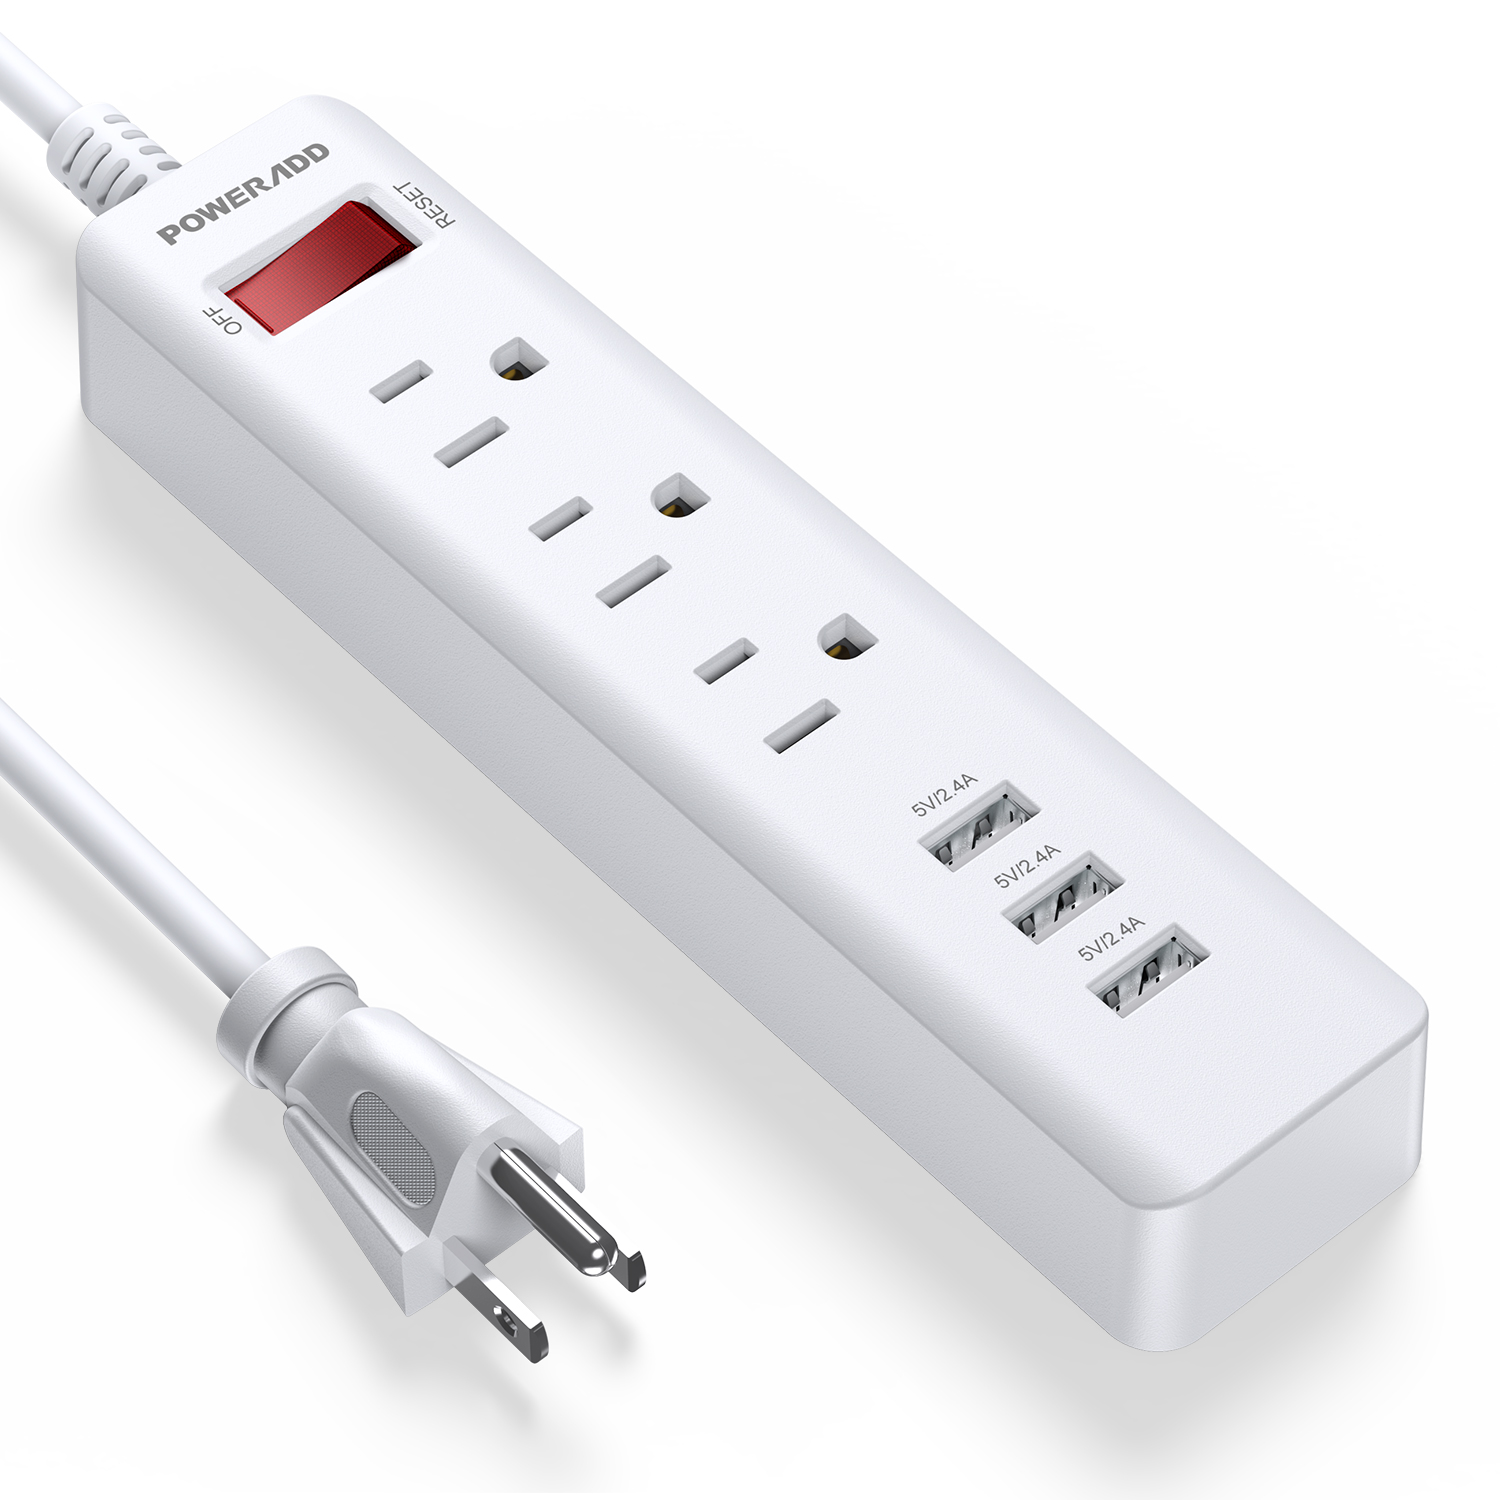 Poweradd 3-Outlet Surge Protector 3 USB Ports Power Strip with 5ft  Heavy-Duty Extension Power Cord, 1250W - UL Listed - Walmart.com